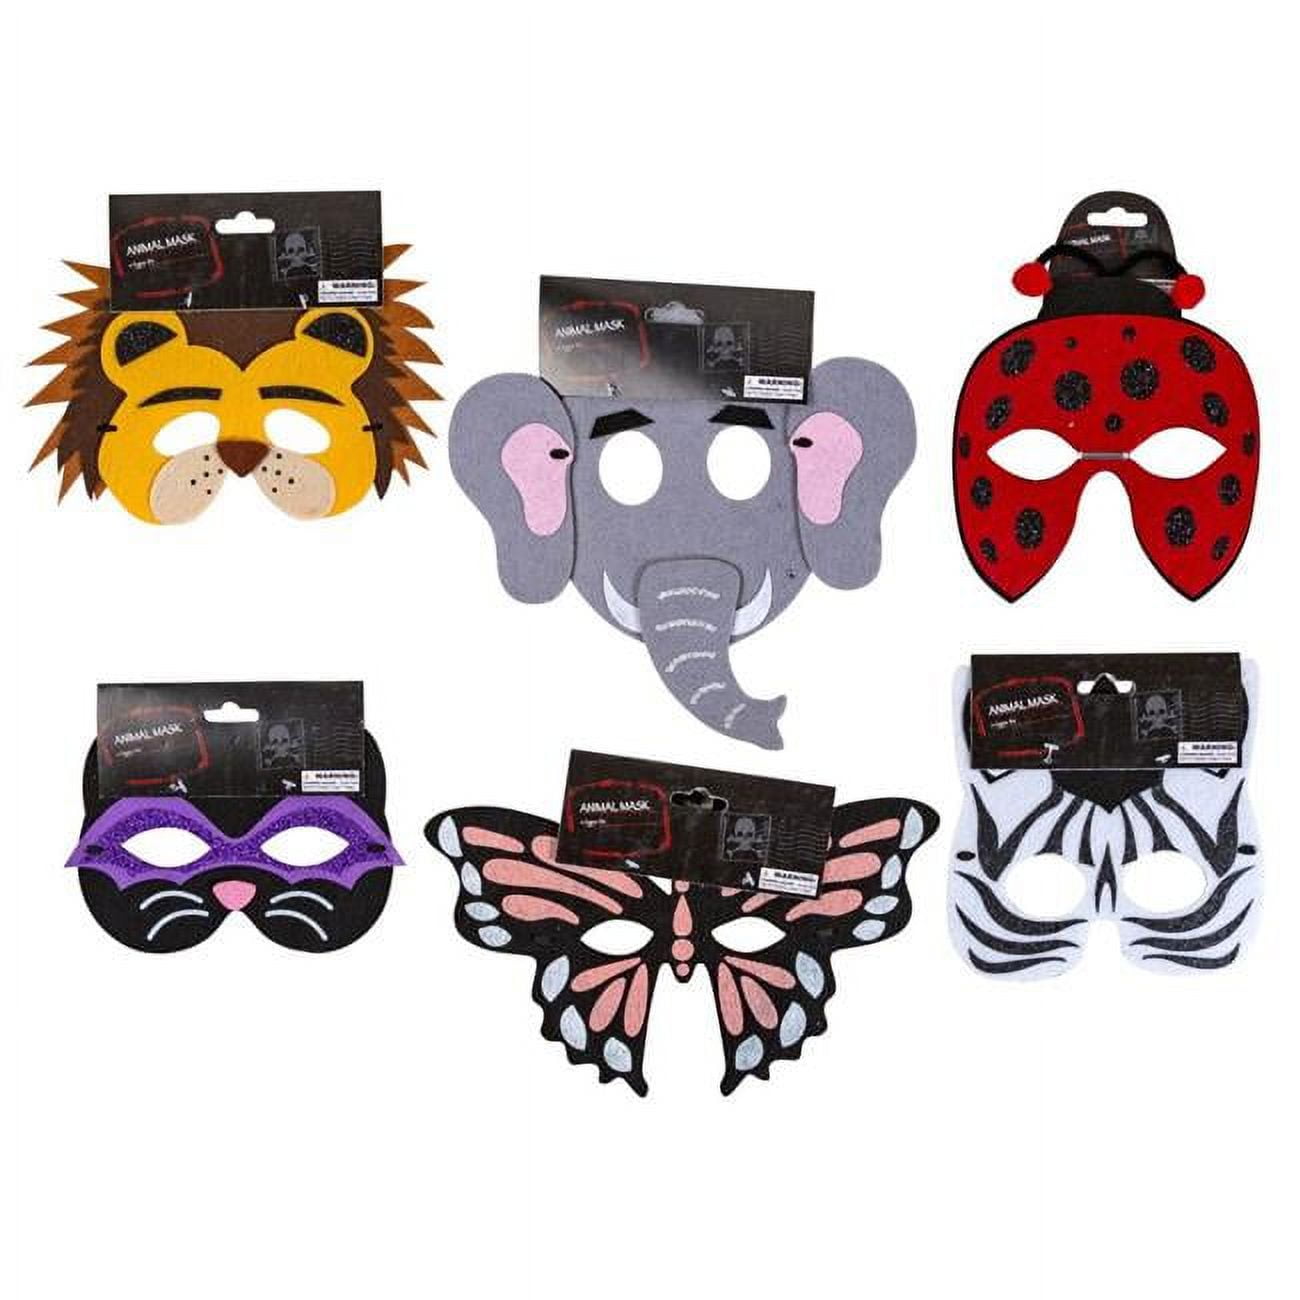 Picture of DDI 2351487 Animal Mask - Assorted Styles Case of 24